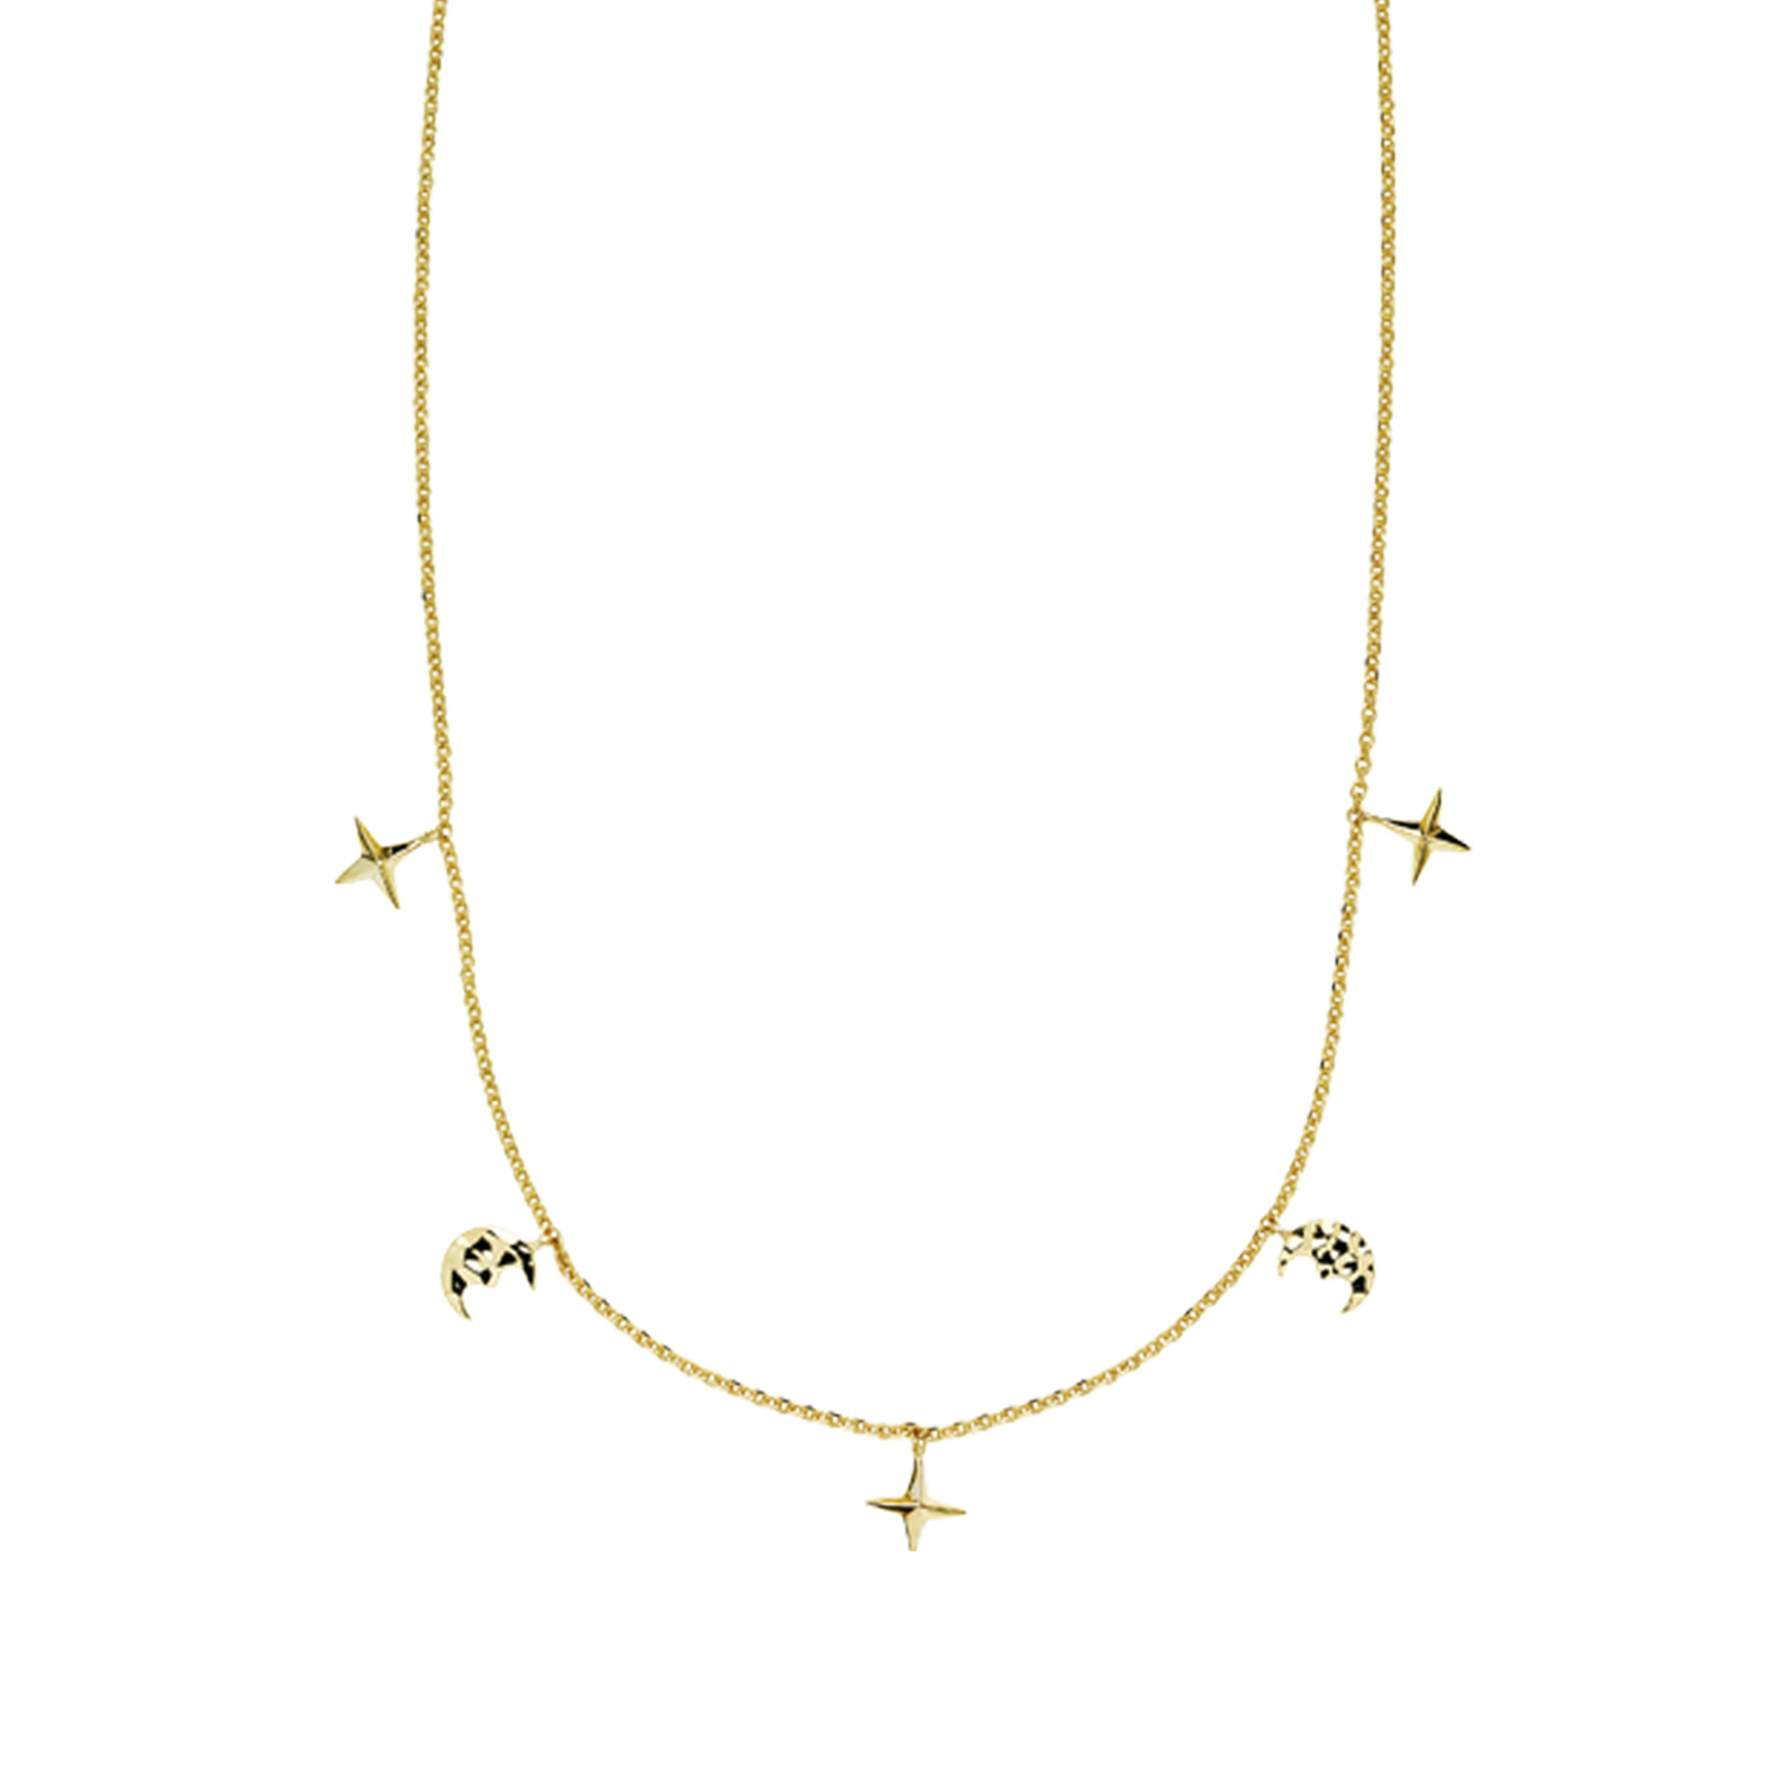 Bella By Sistie Necklace from Sistie in Goldplated-Silver Sterling 925|Blank